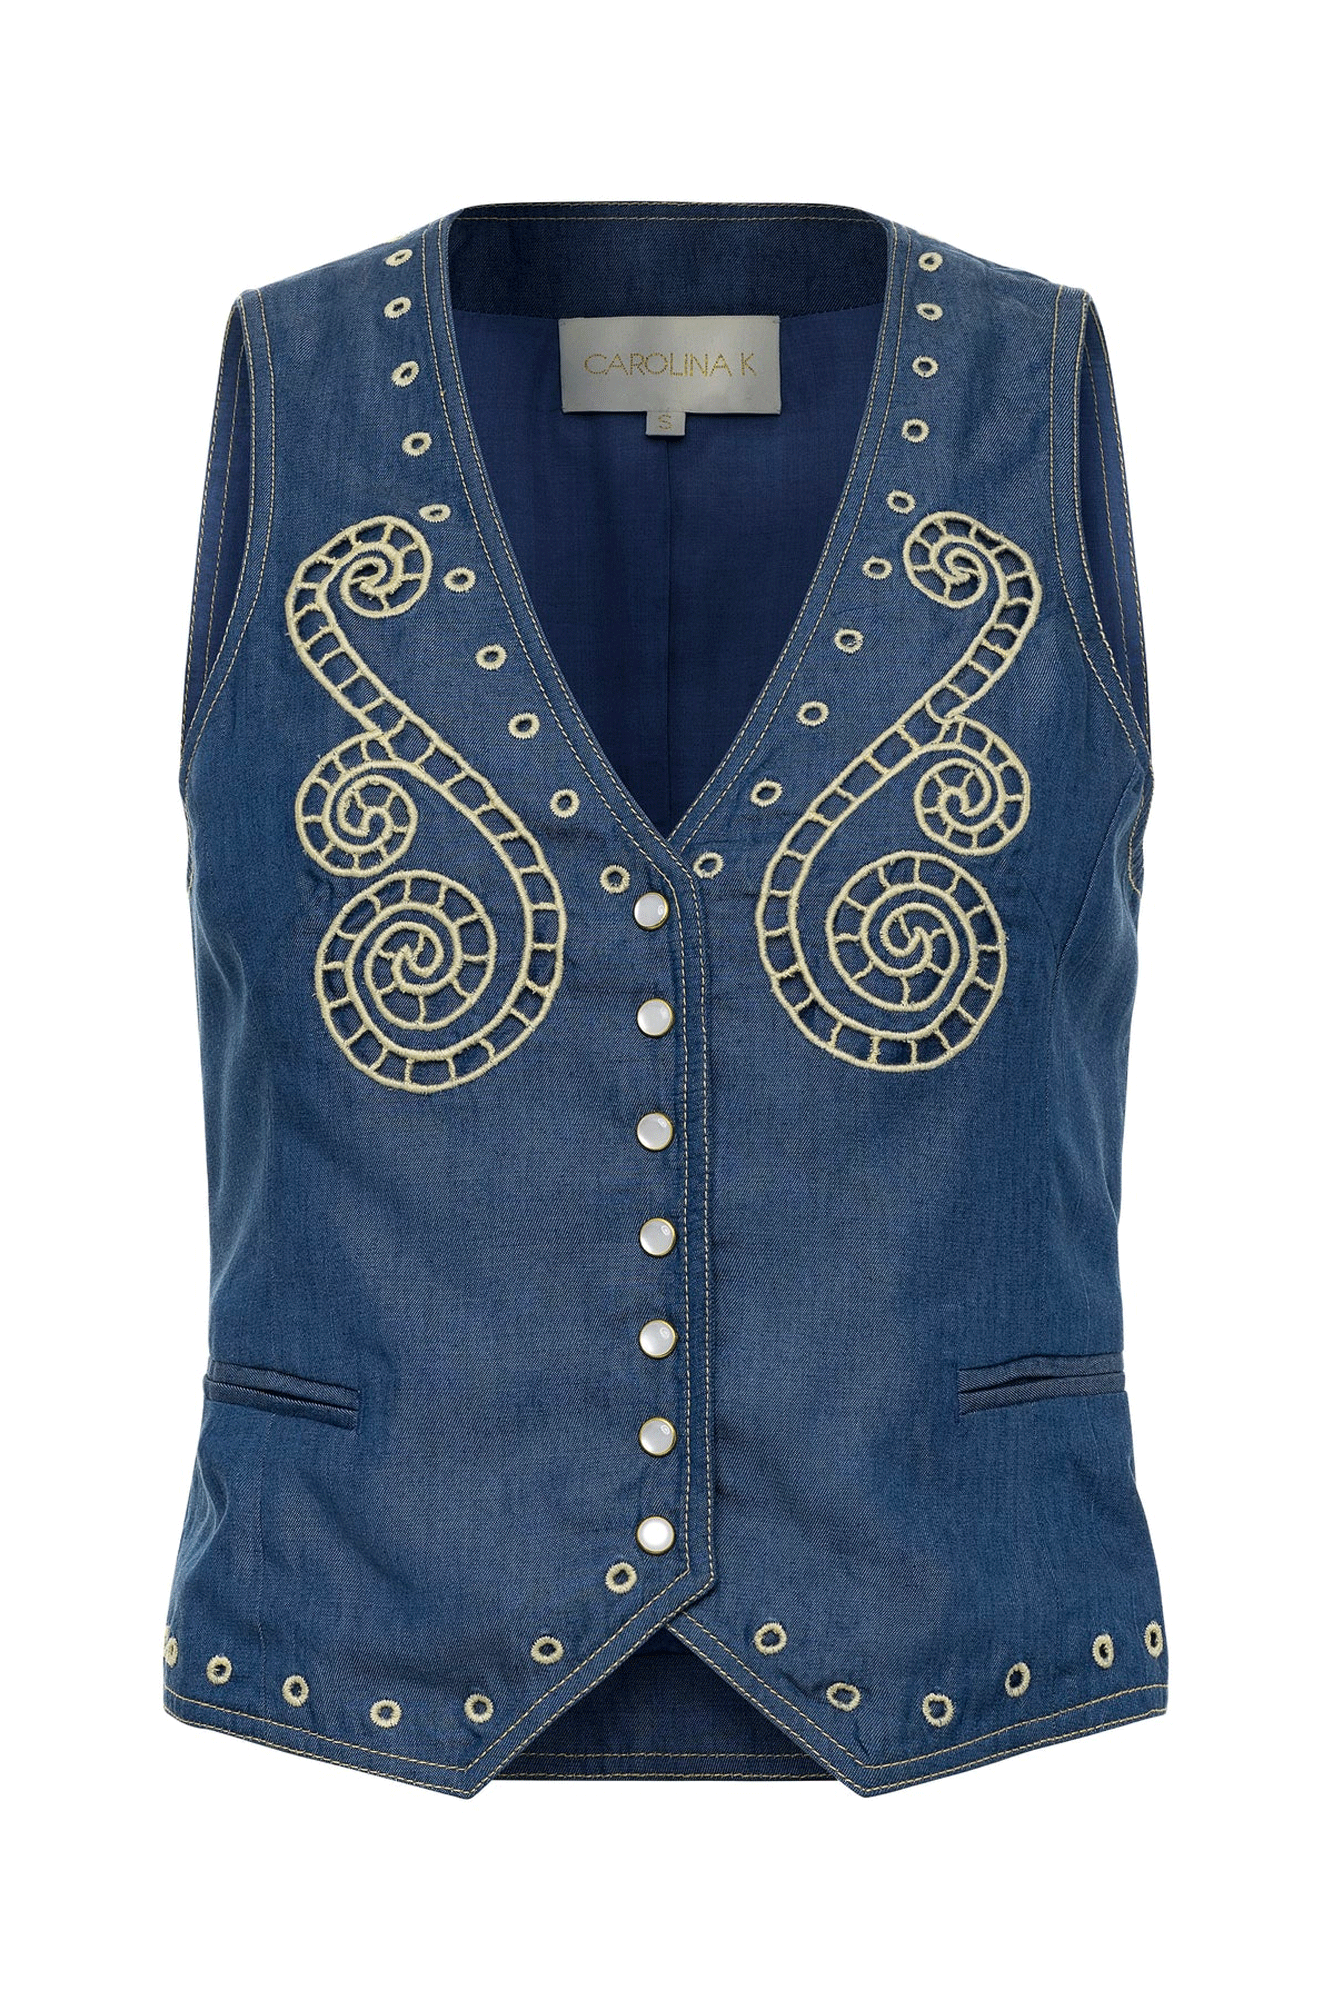 The Sun Vest from Carolina K is a stylish and functional addition to your wardrobe. Featuring an embroidered design, two side front pockets, a deep V-neck, and a lined interior, this vest offers a comfortable and attractive fit. Thanks to its front button closure, you can easily adjust the fit to suit your needs.